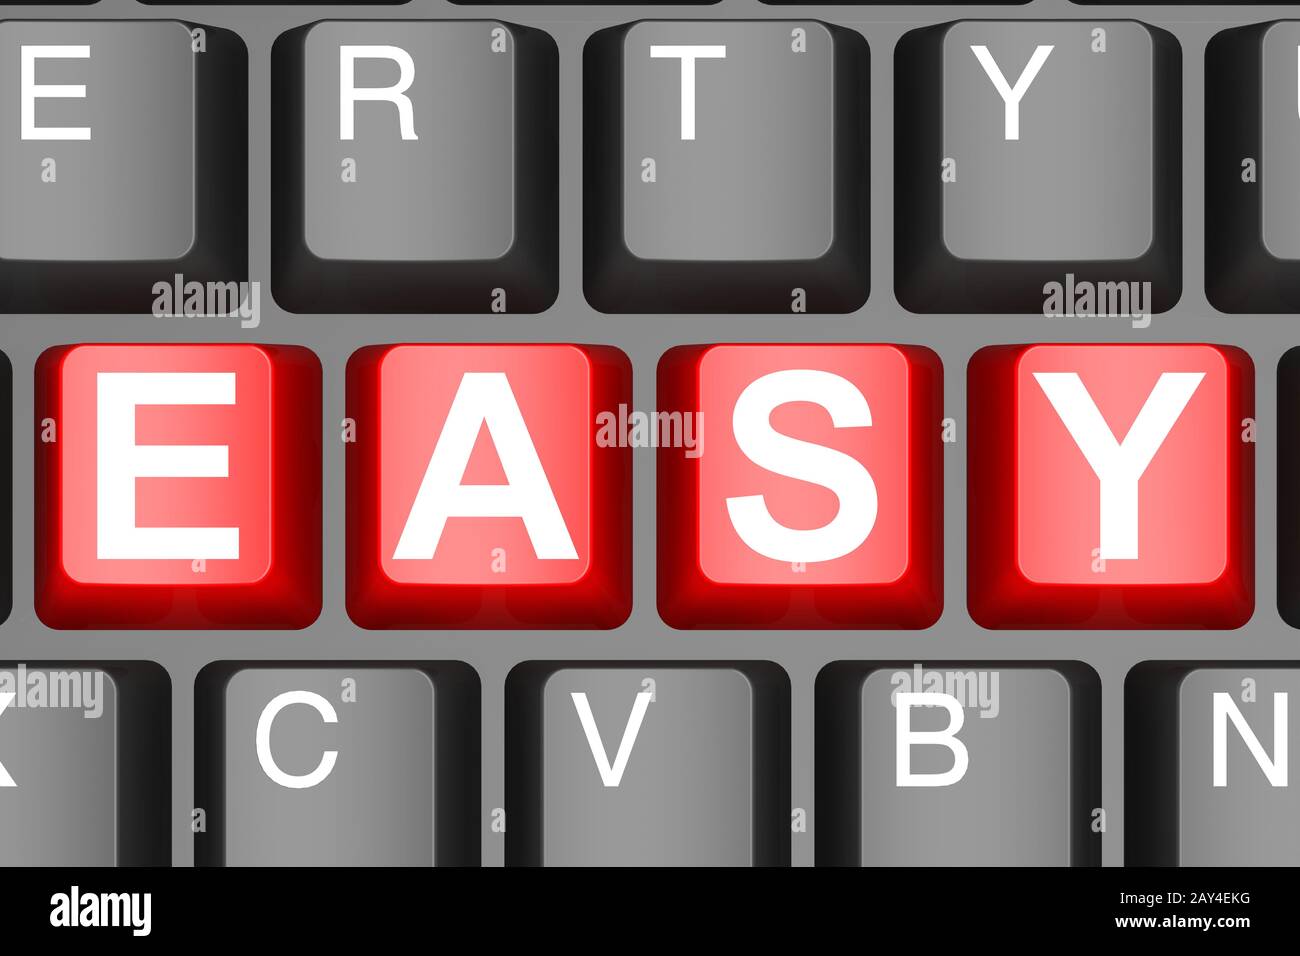 Easy button on modern computer keyboard Stock Photo